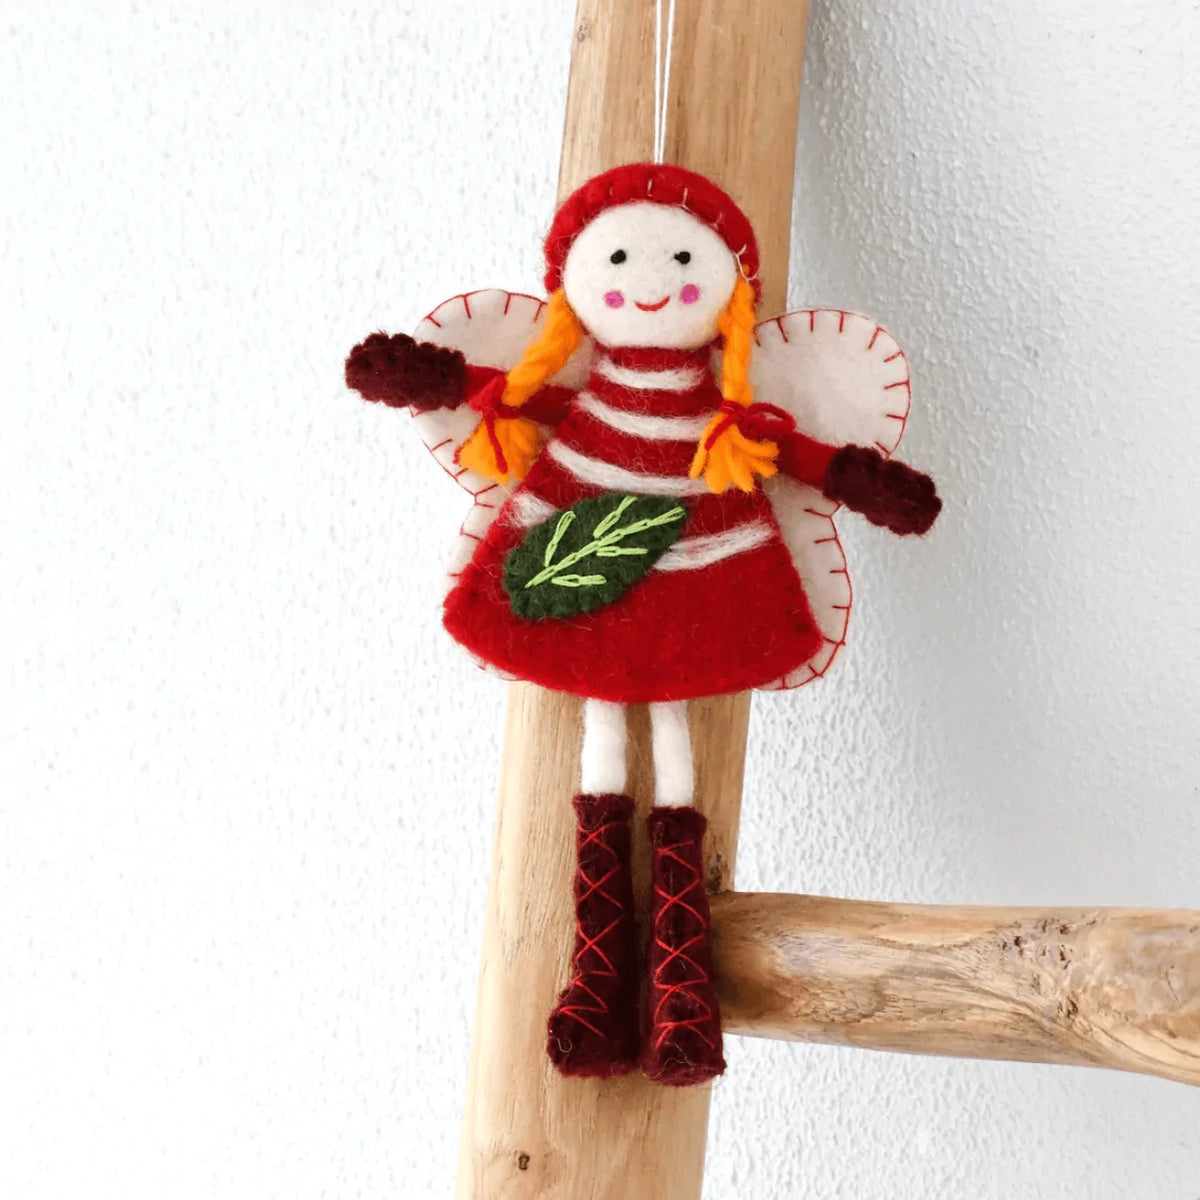 The Curated Parcel - Felt Christmas Fairy - Red Dress 